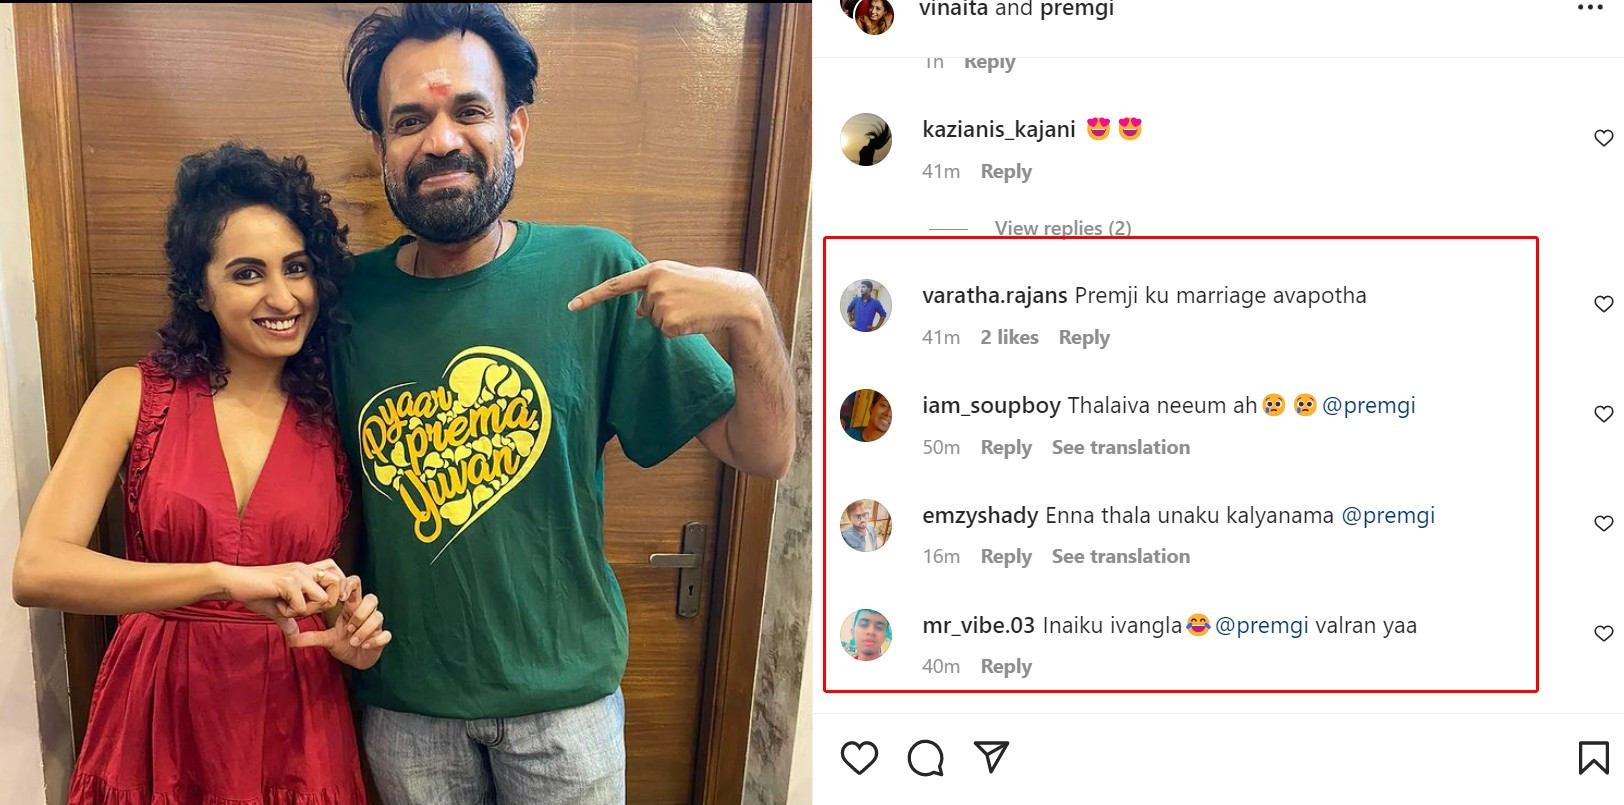 actor premji going to marry a celebrity photos getting viral